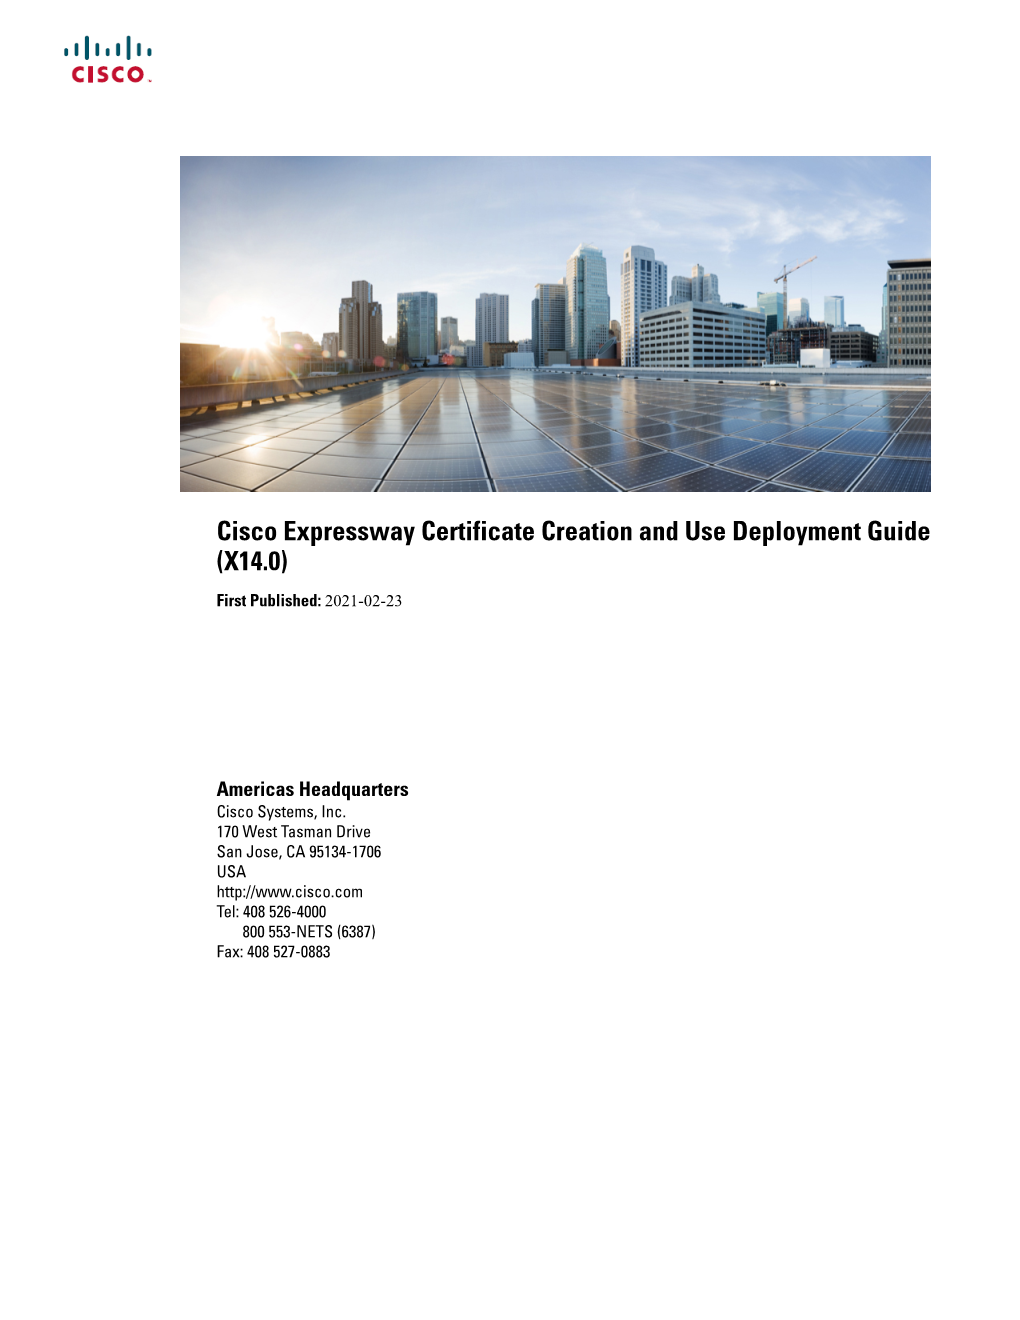 Cisco Expressway Certificate Creation and Use Deployment Guide (X14.0)